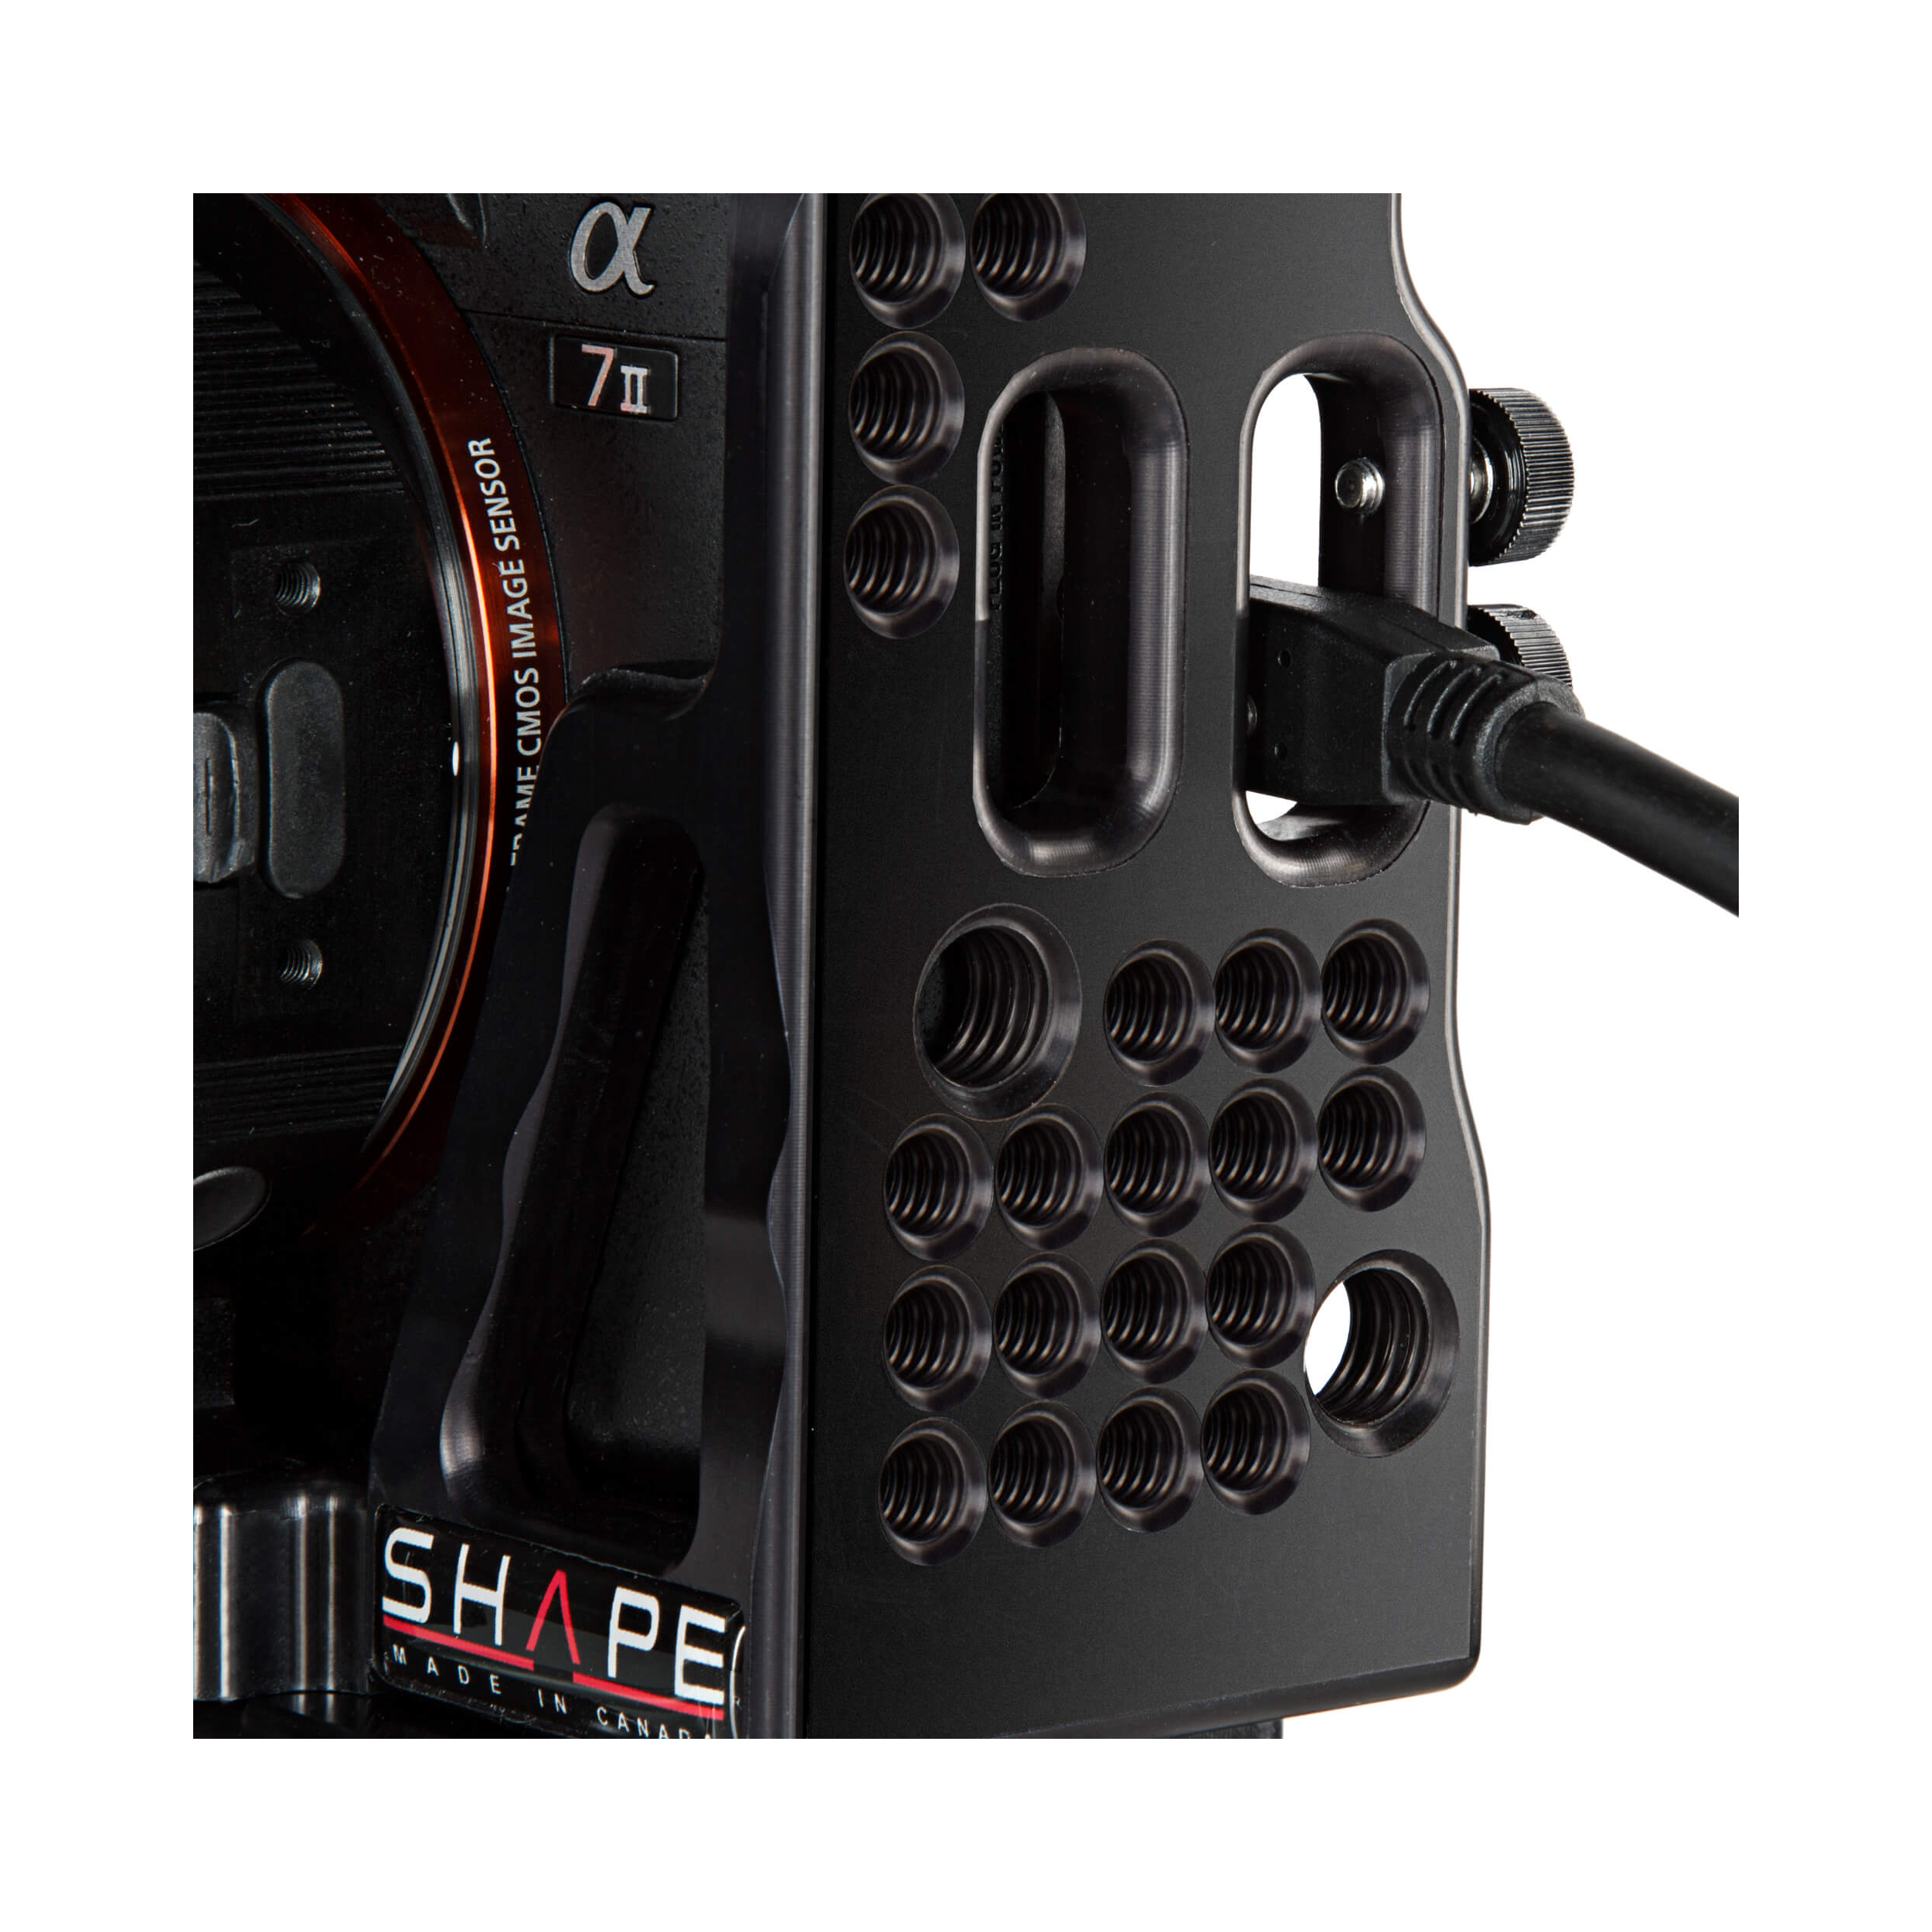 SHAPE Cage with Candy Handle for Sony a7 II, a7S II, & a7R II